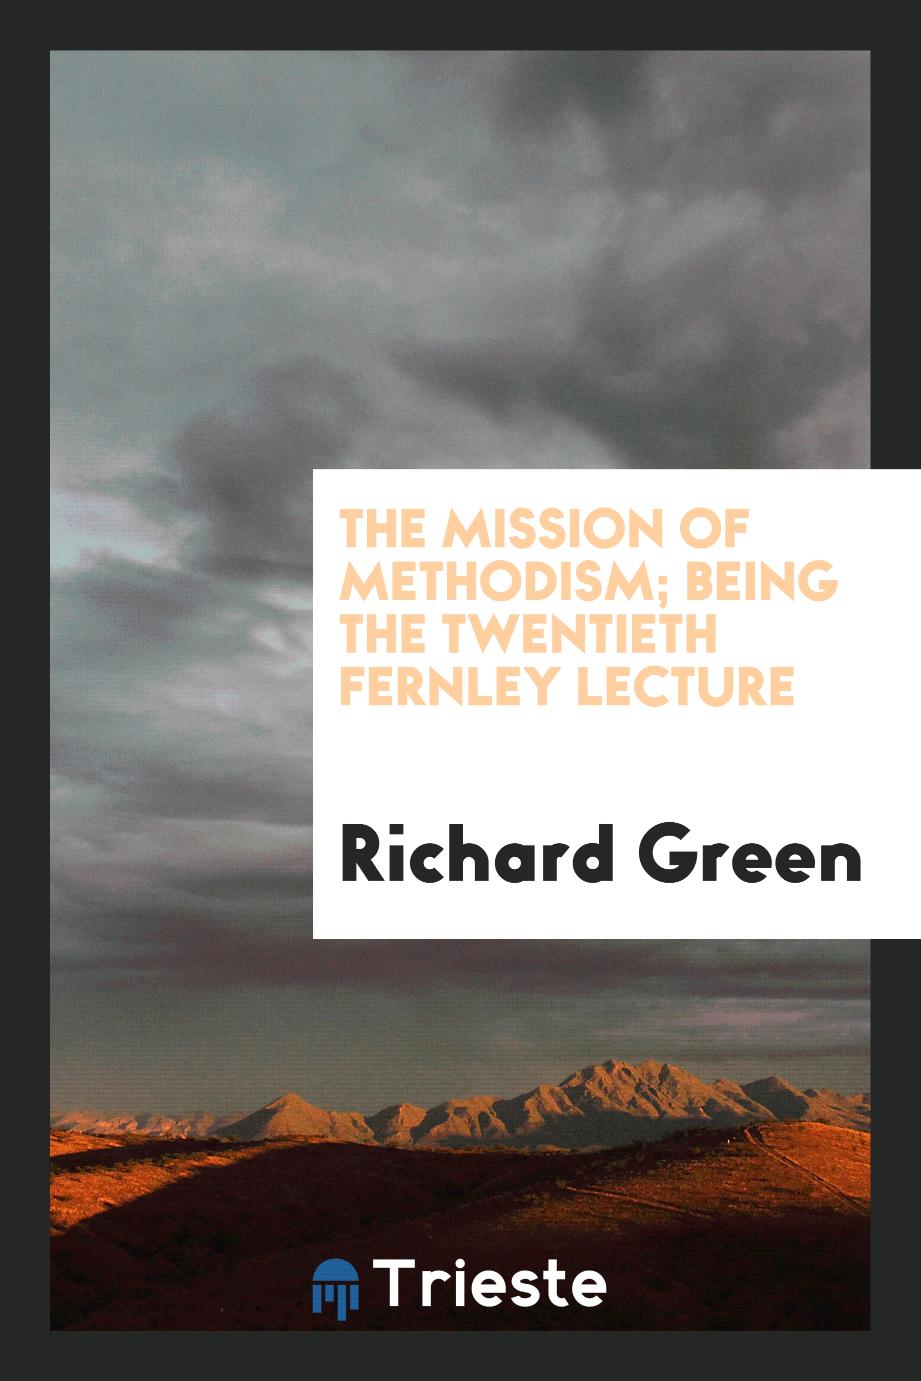 The mission of Methodism; Being the twentieth fernley lecture